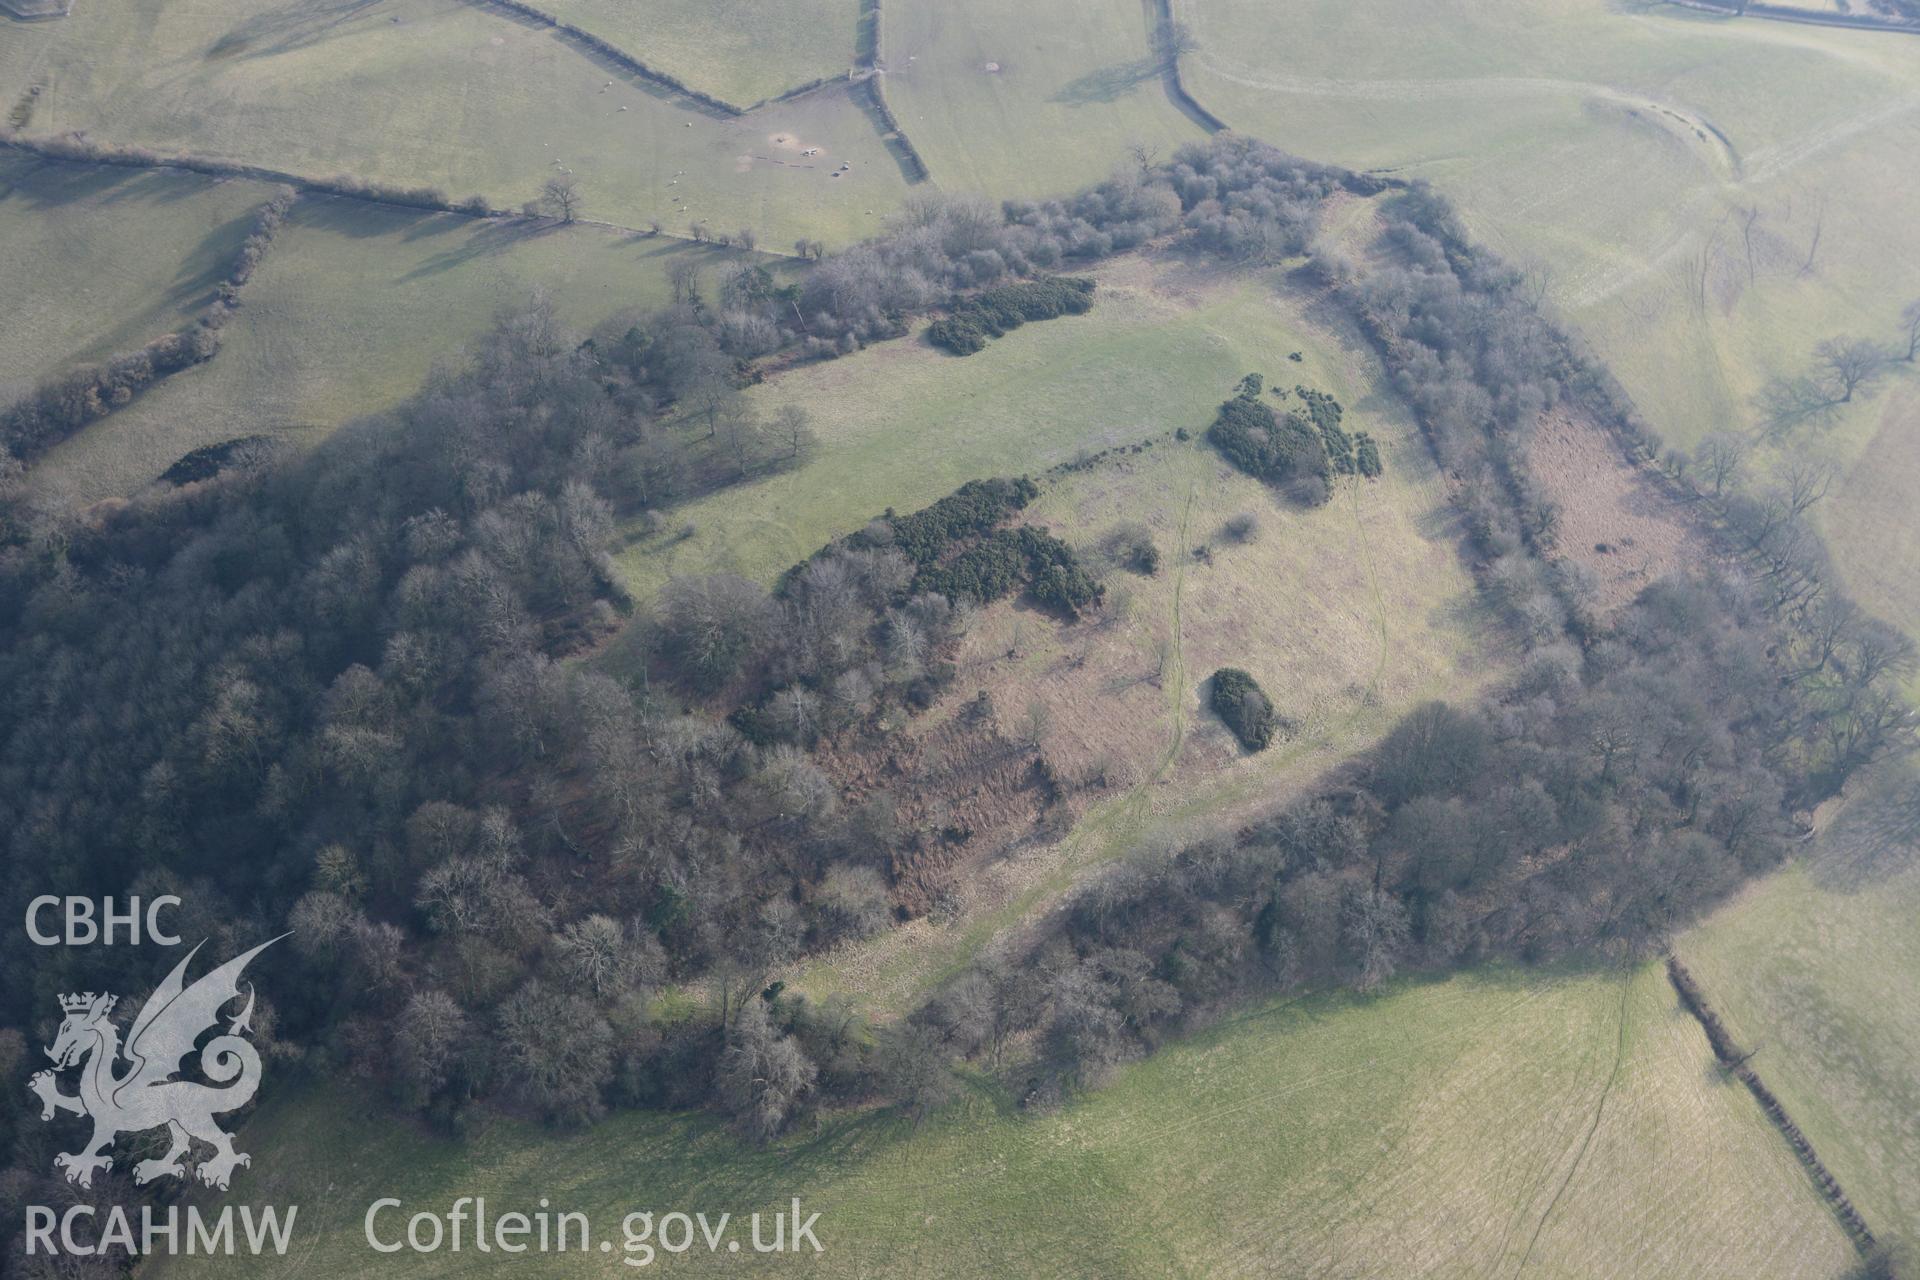 RCAHMW colour oblique photograph of Fridd Faldwyn Hillfort, Montgomery. Taken by Toby Driver on 11/03/2010.